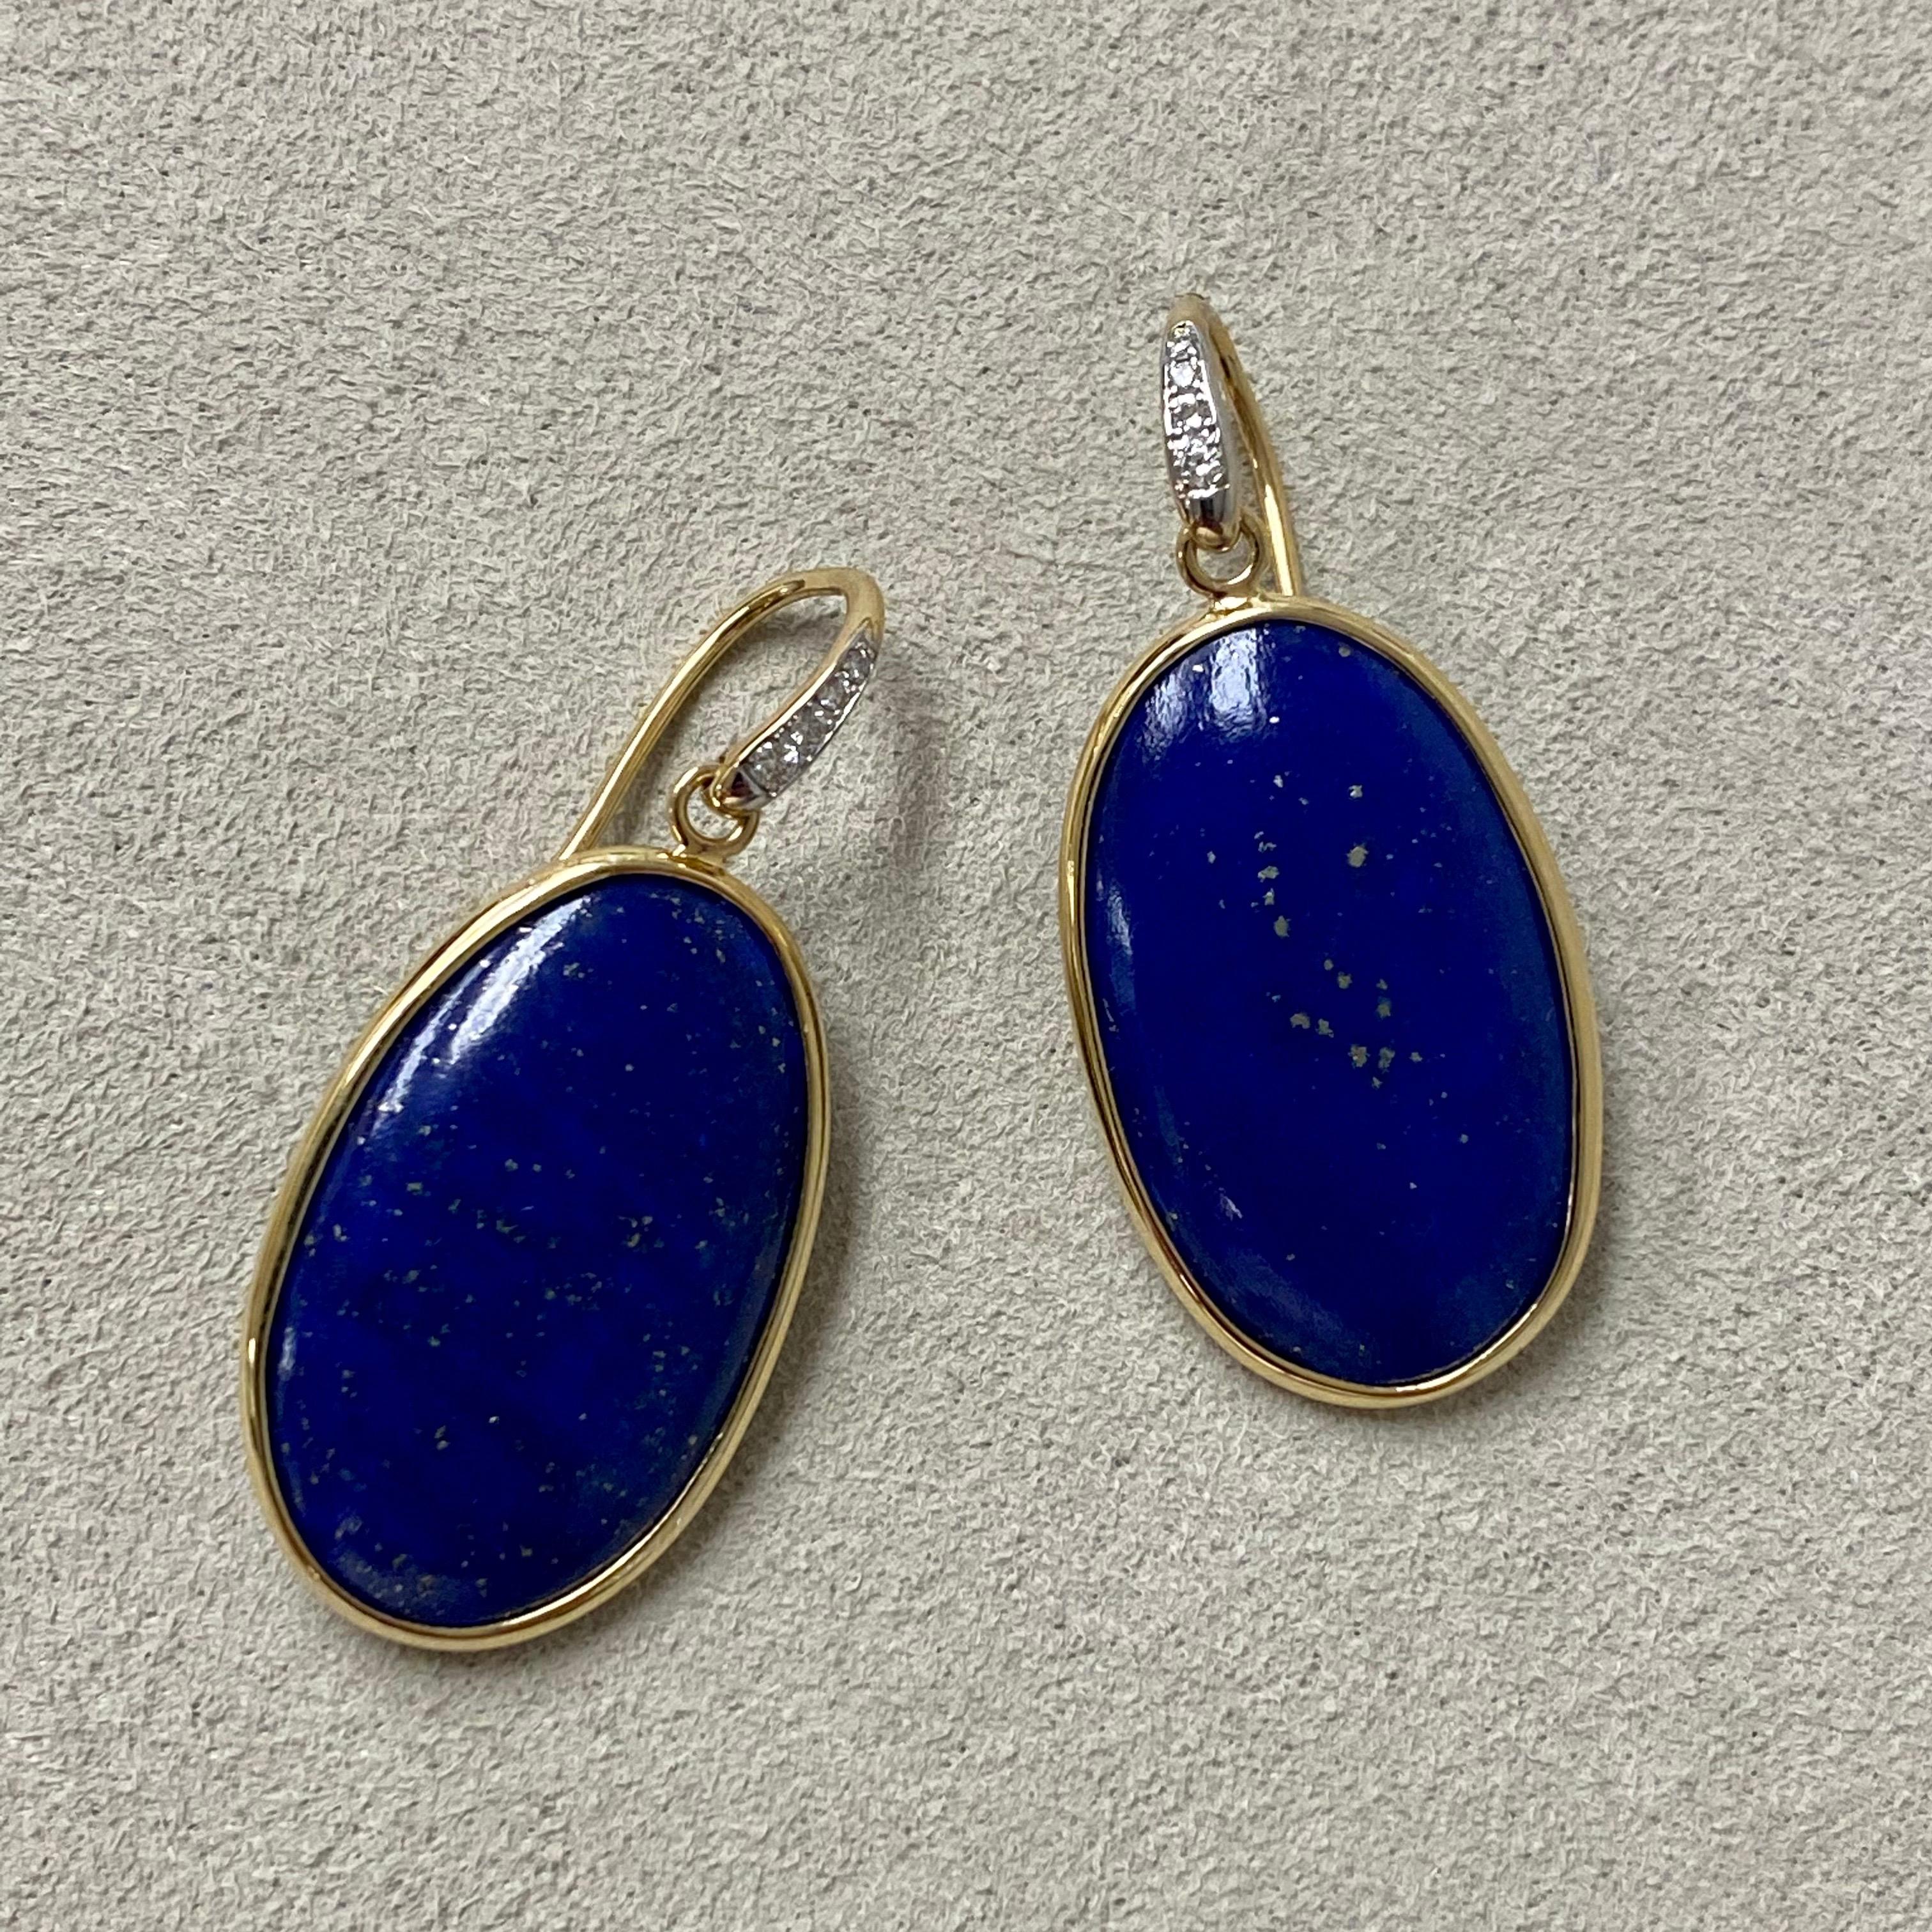 Created in 18kyg
Lapis Lazuli 27 carats approx.
Champagne Diamonds 0.05 carat approx.
Limited edition


About the Designers ~ Dharmesh & Namrata

Drawing inspiration from little things, Dharmesh & Namrata Kothari have created an extraordinary and